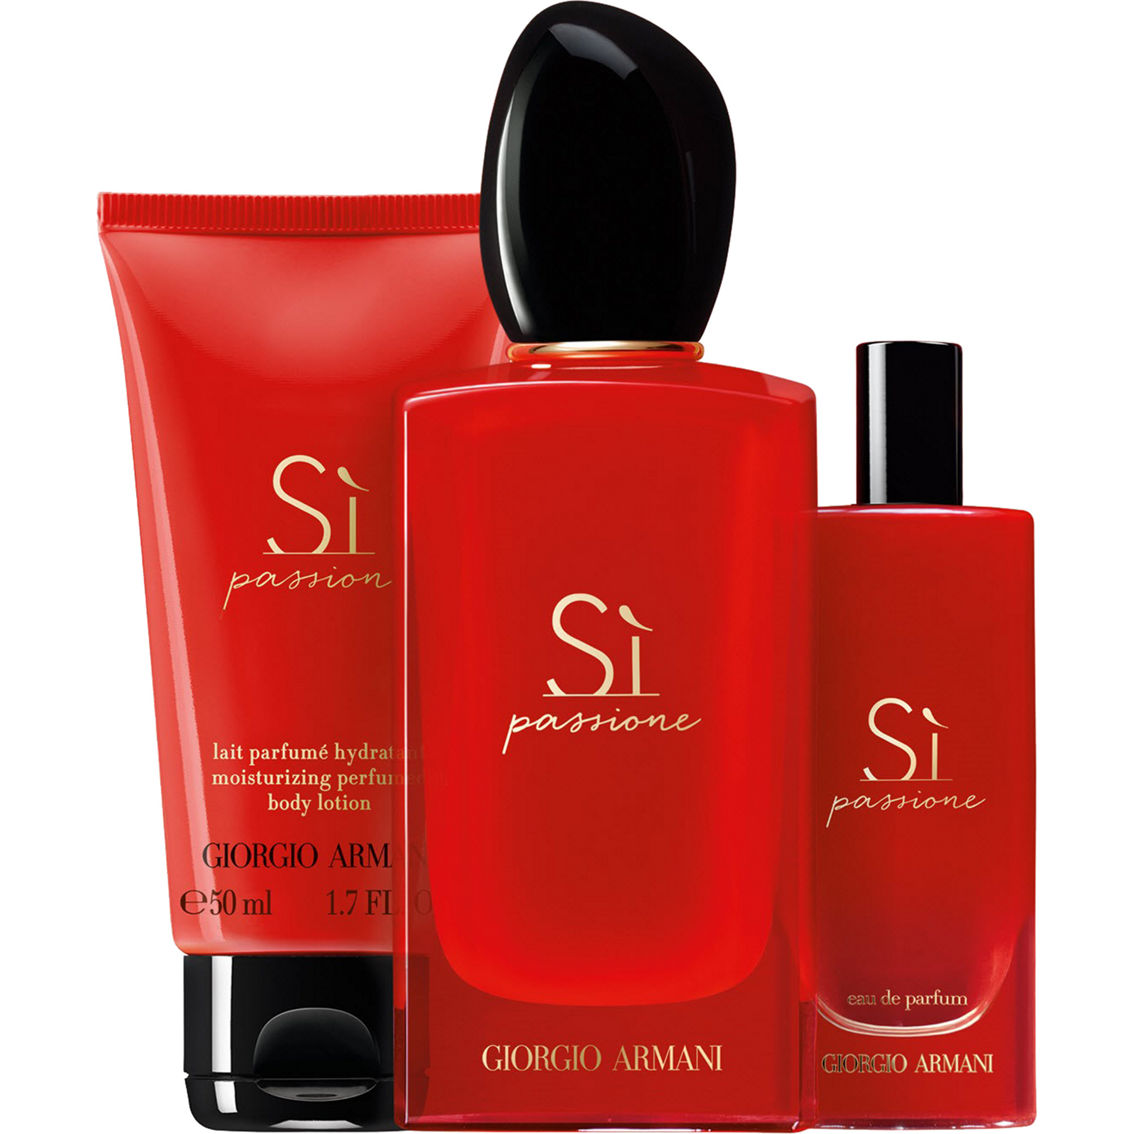 Giorgio Armani Si Passione 3 Pc. Set | Gifts Sets For Her | Beauty & Health  | Shop The Exchange